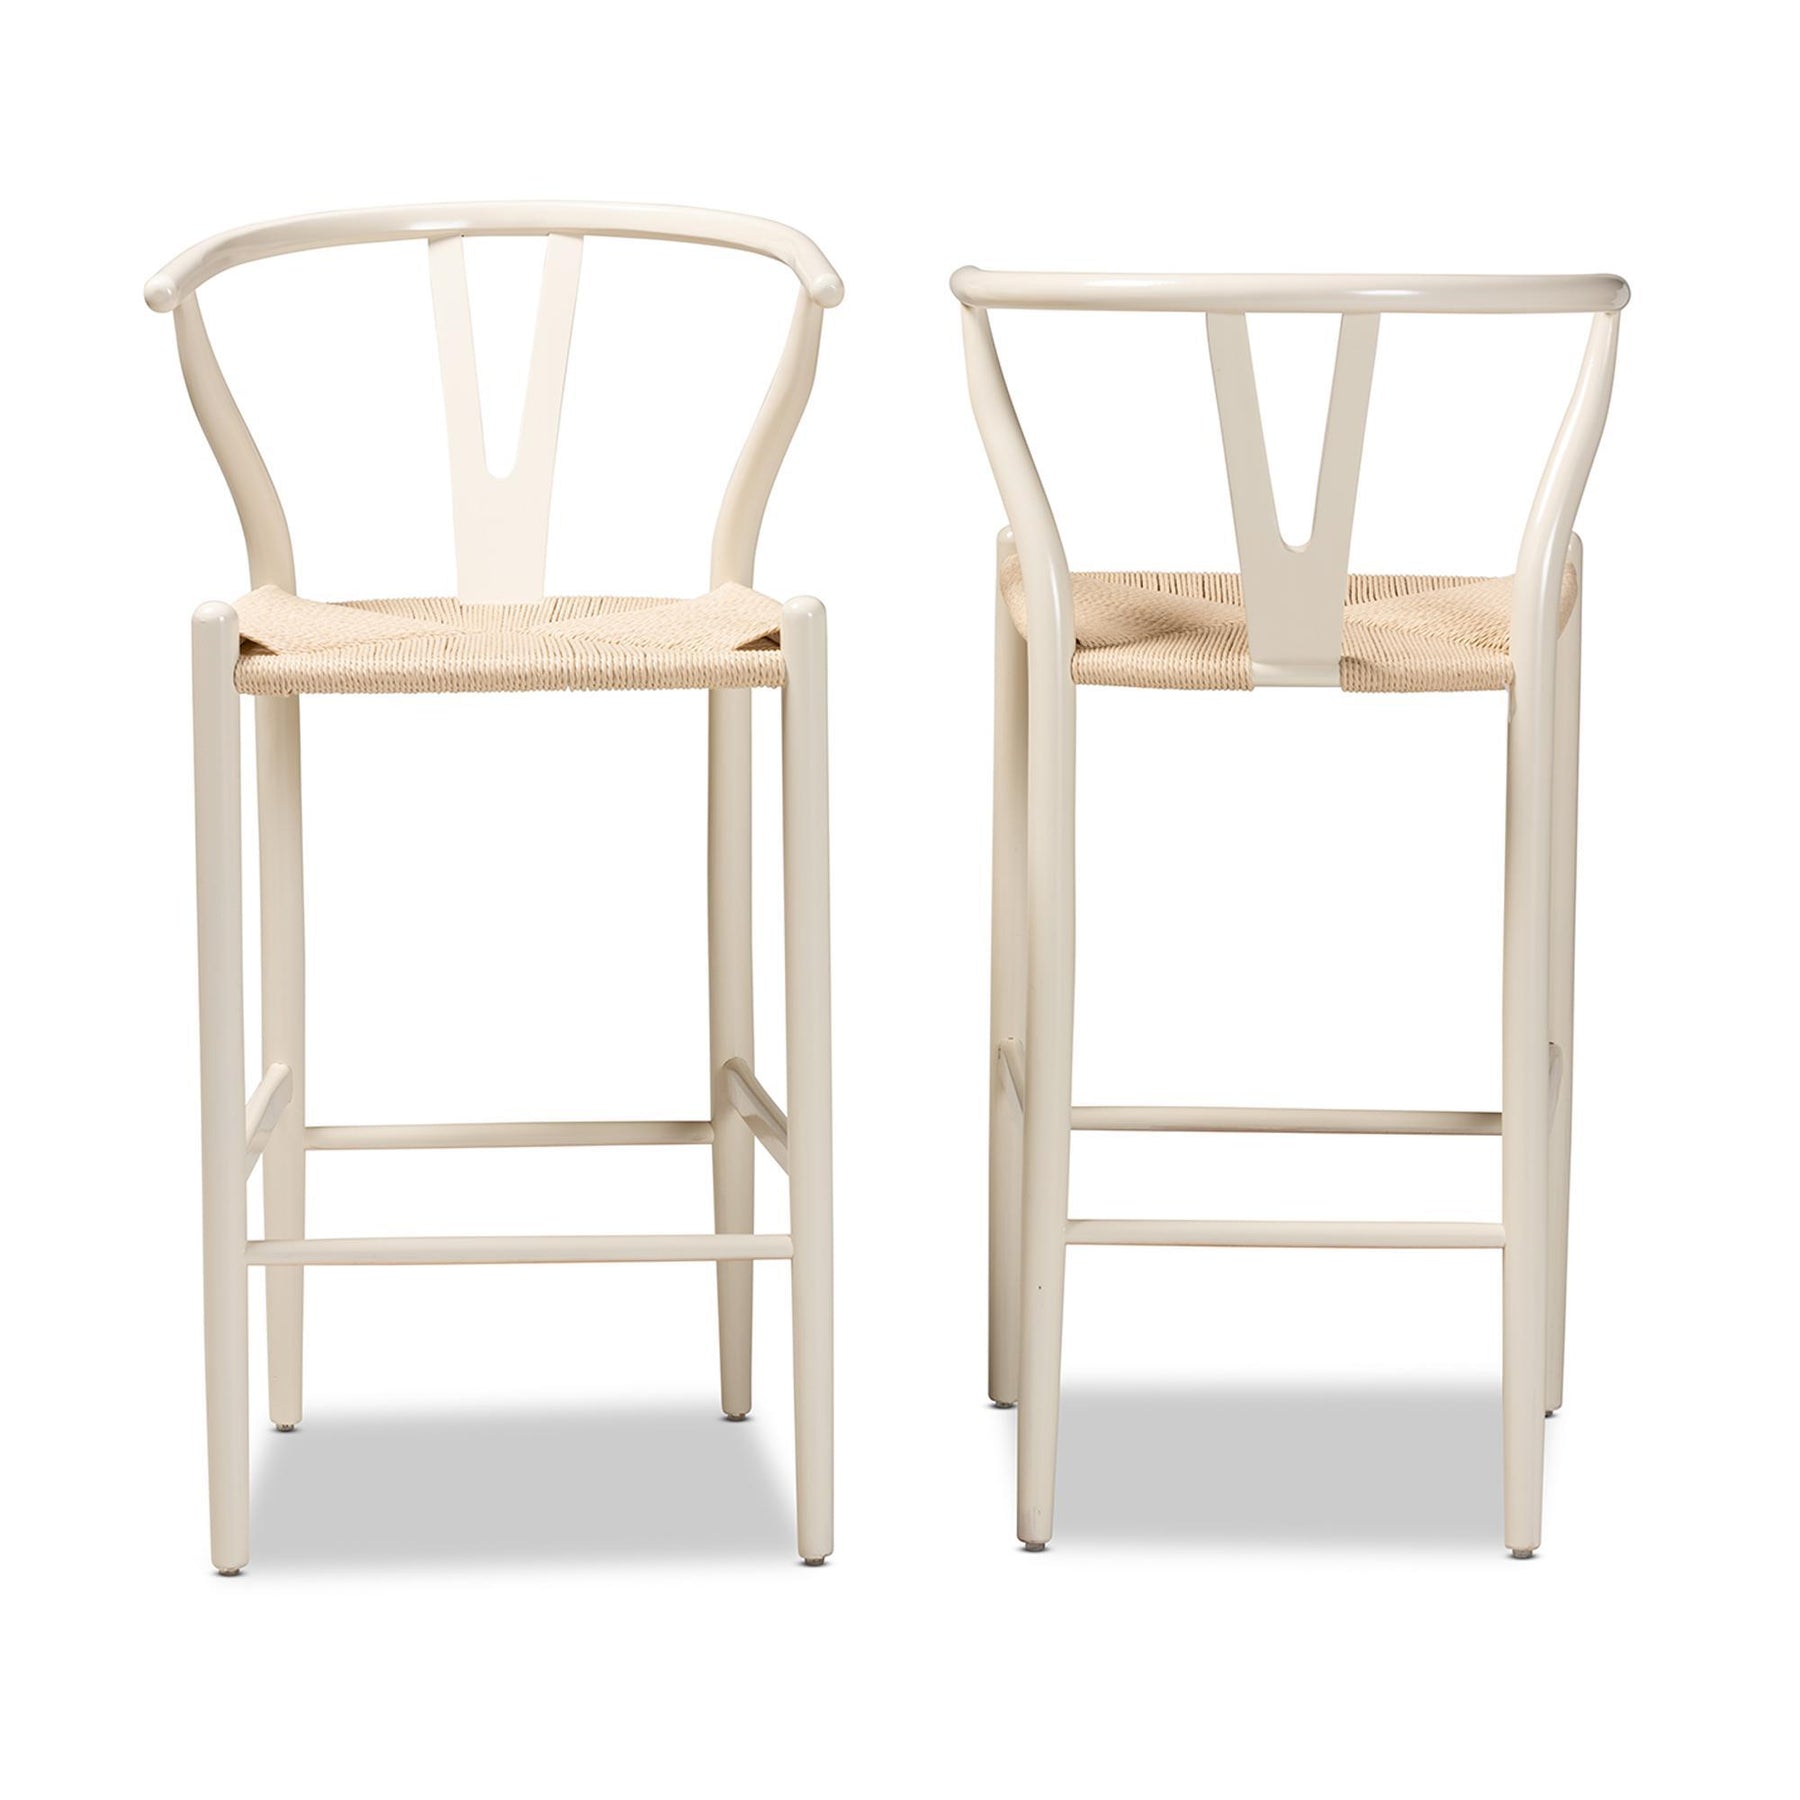 Baxton Studio Paxton Modern And Contemporary White Finished Wood 2-Piece Bar Stool Set - Y-BAR-W-White/Rope-Wishbone-Stool